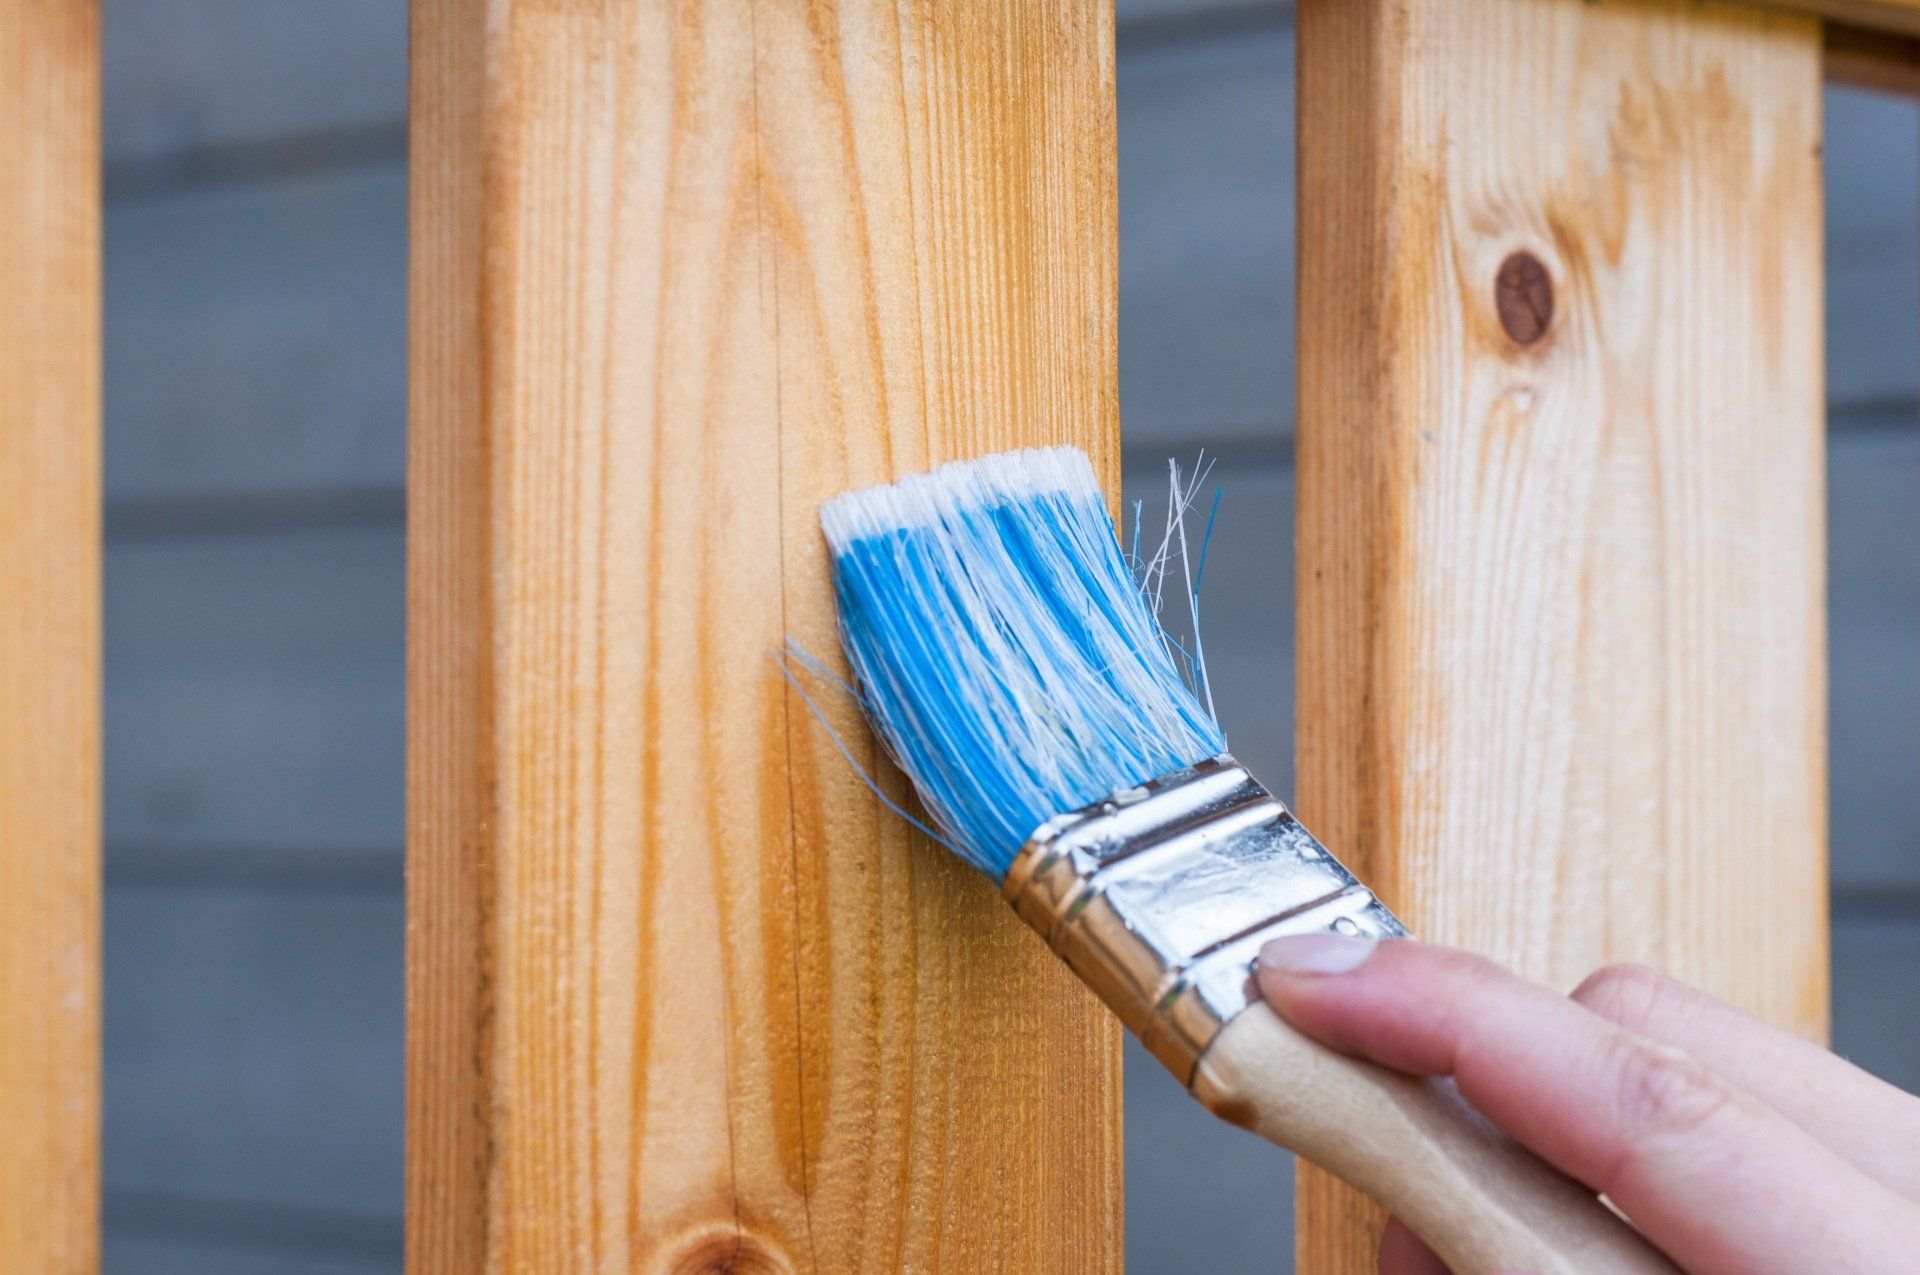 A person is painting a wooden railing with a blue brush.